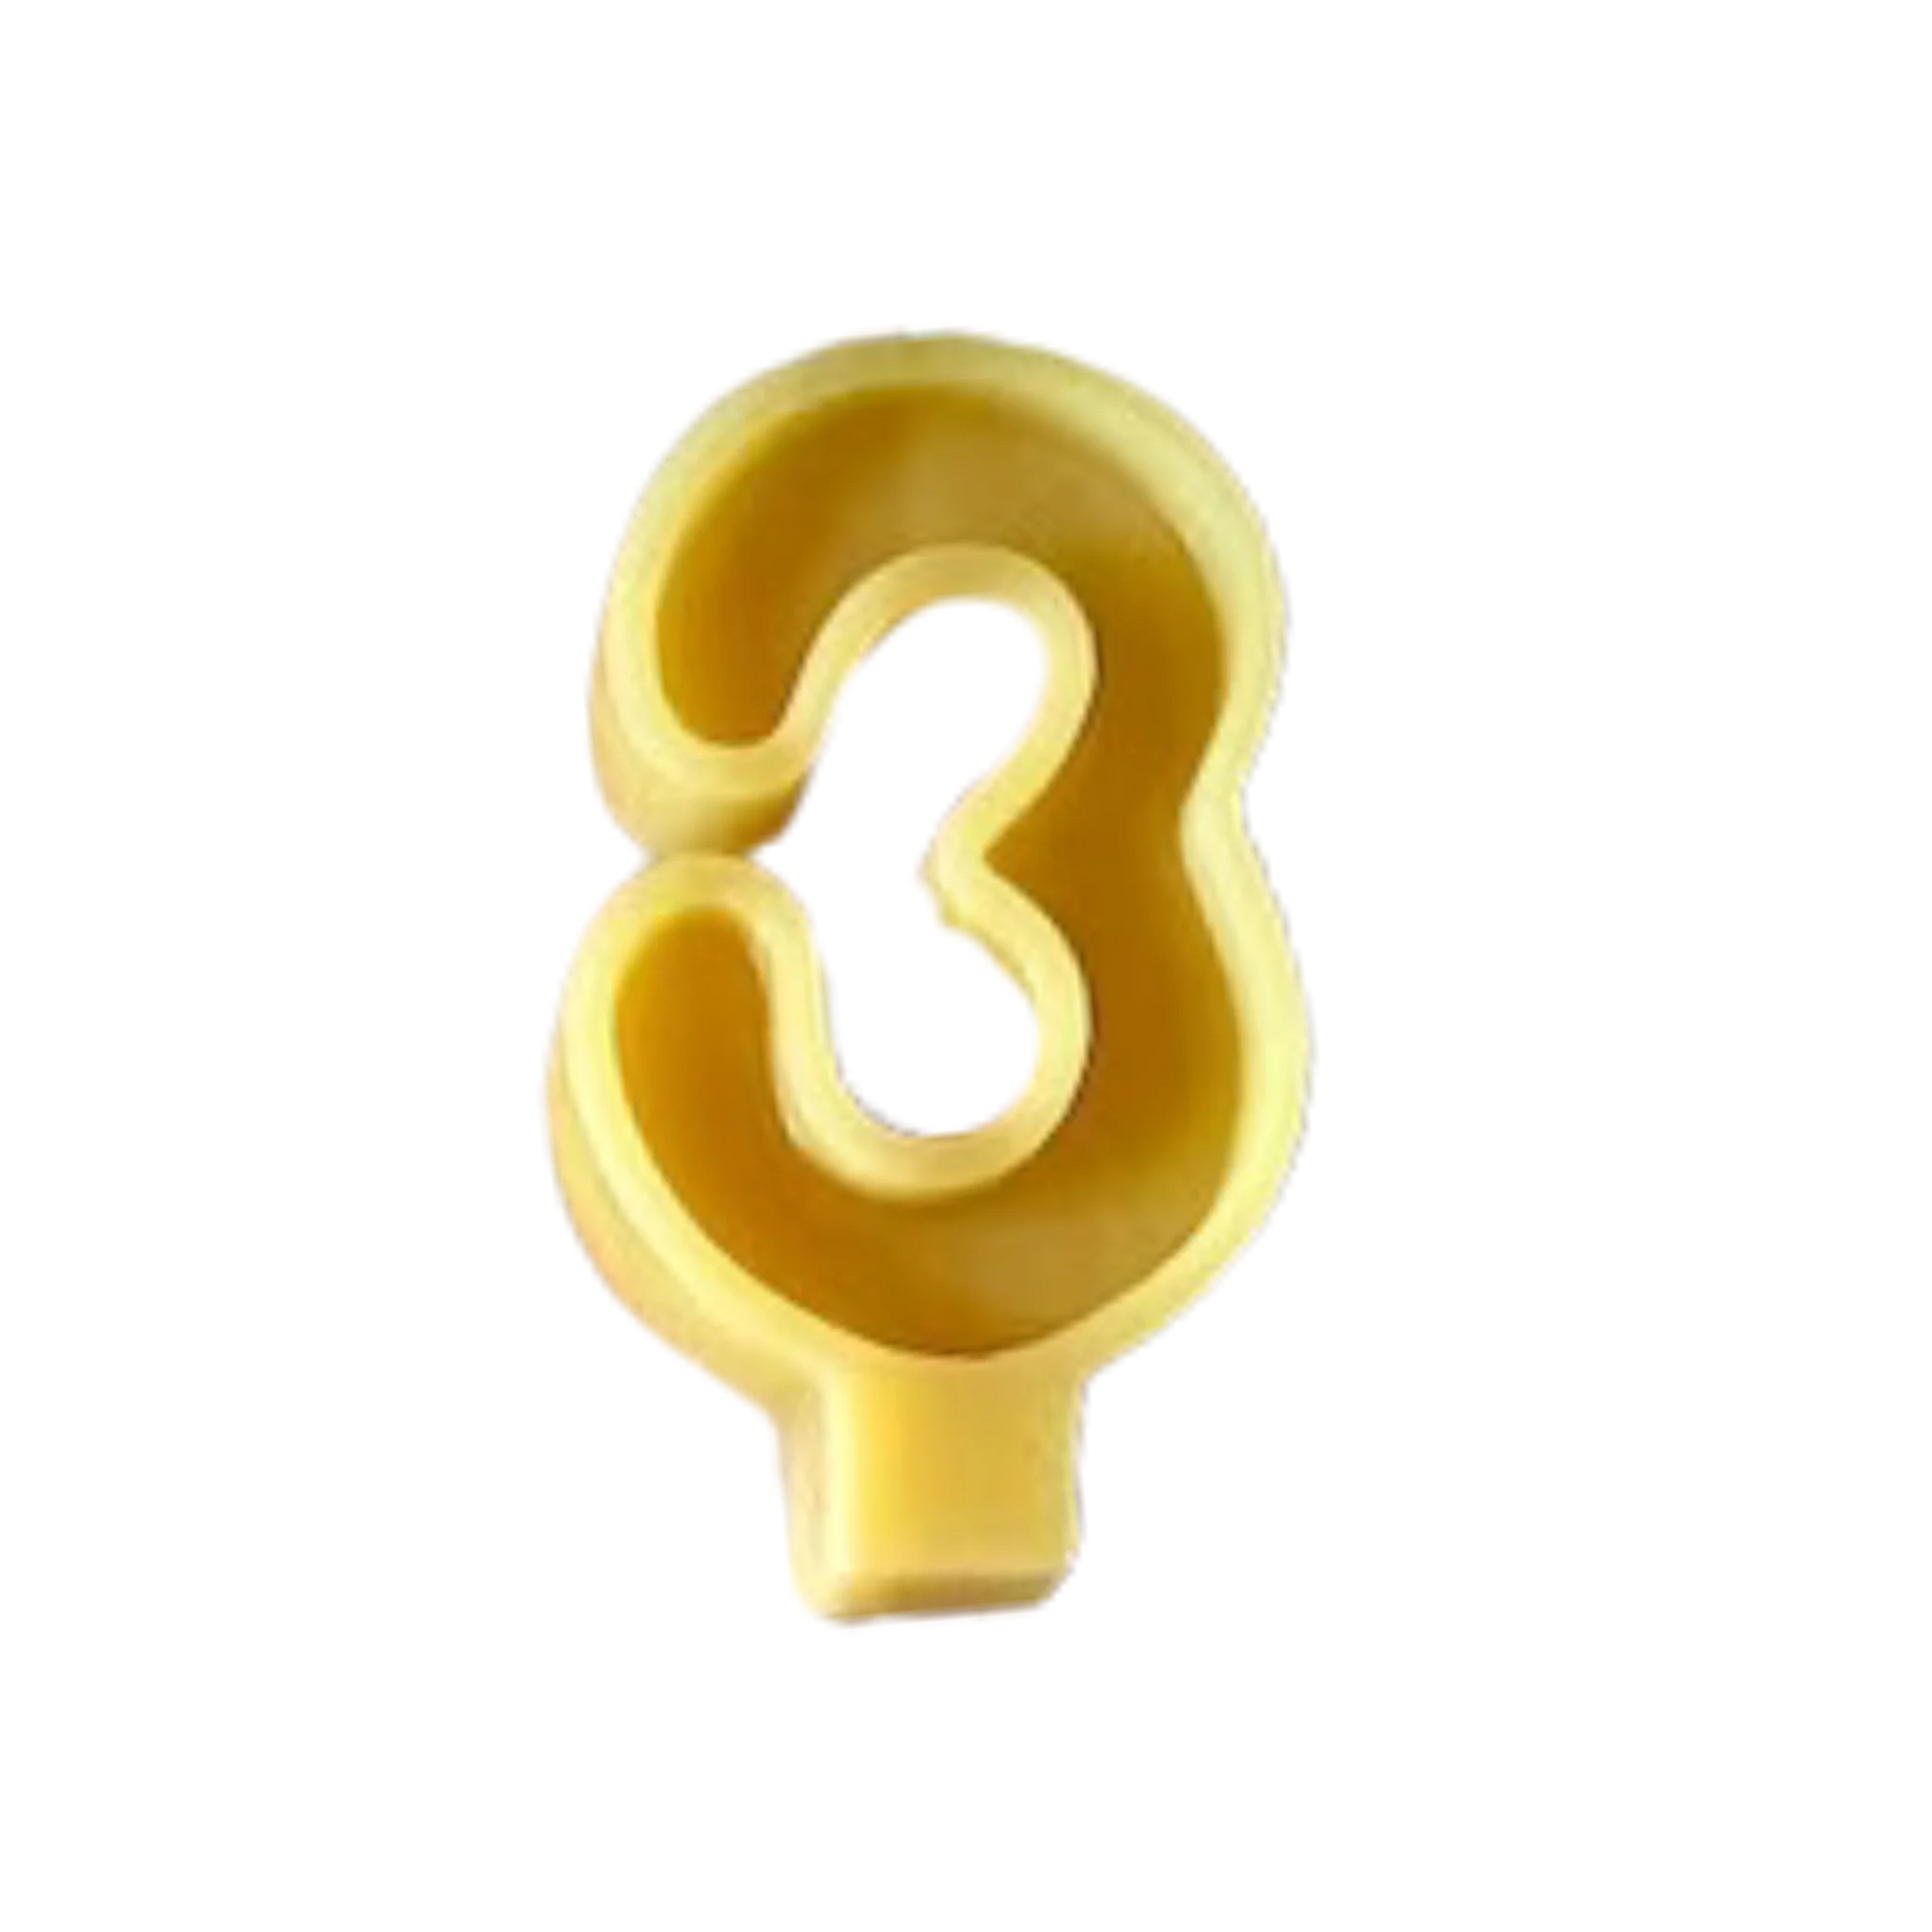 Biodegradable Number Candles Made from Beeswax for a Clean Burn